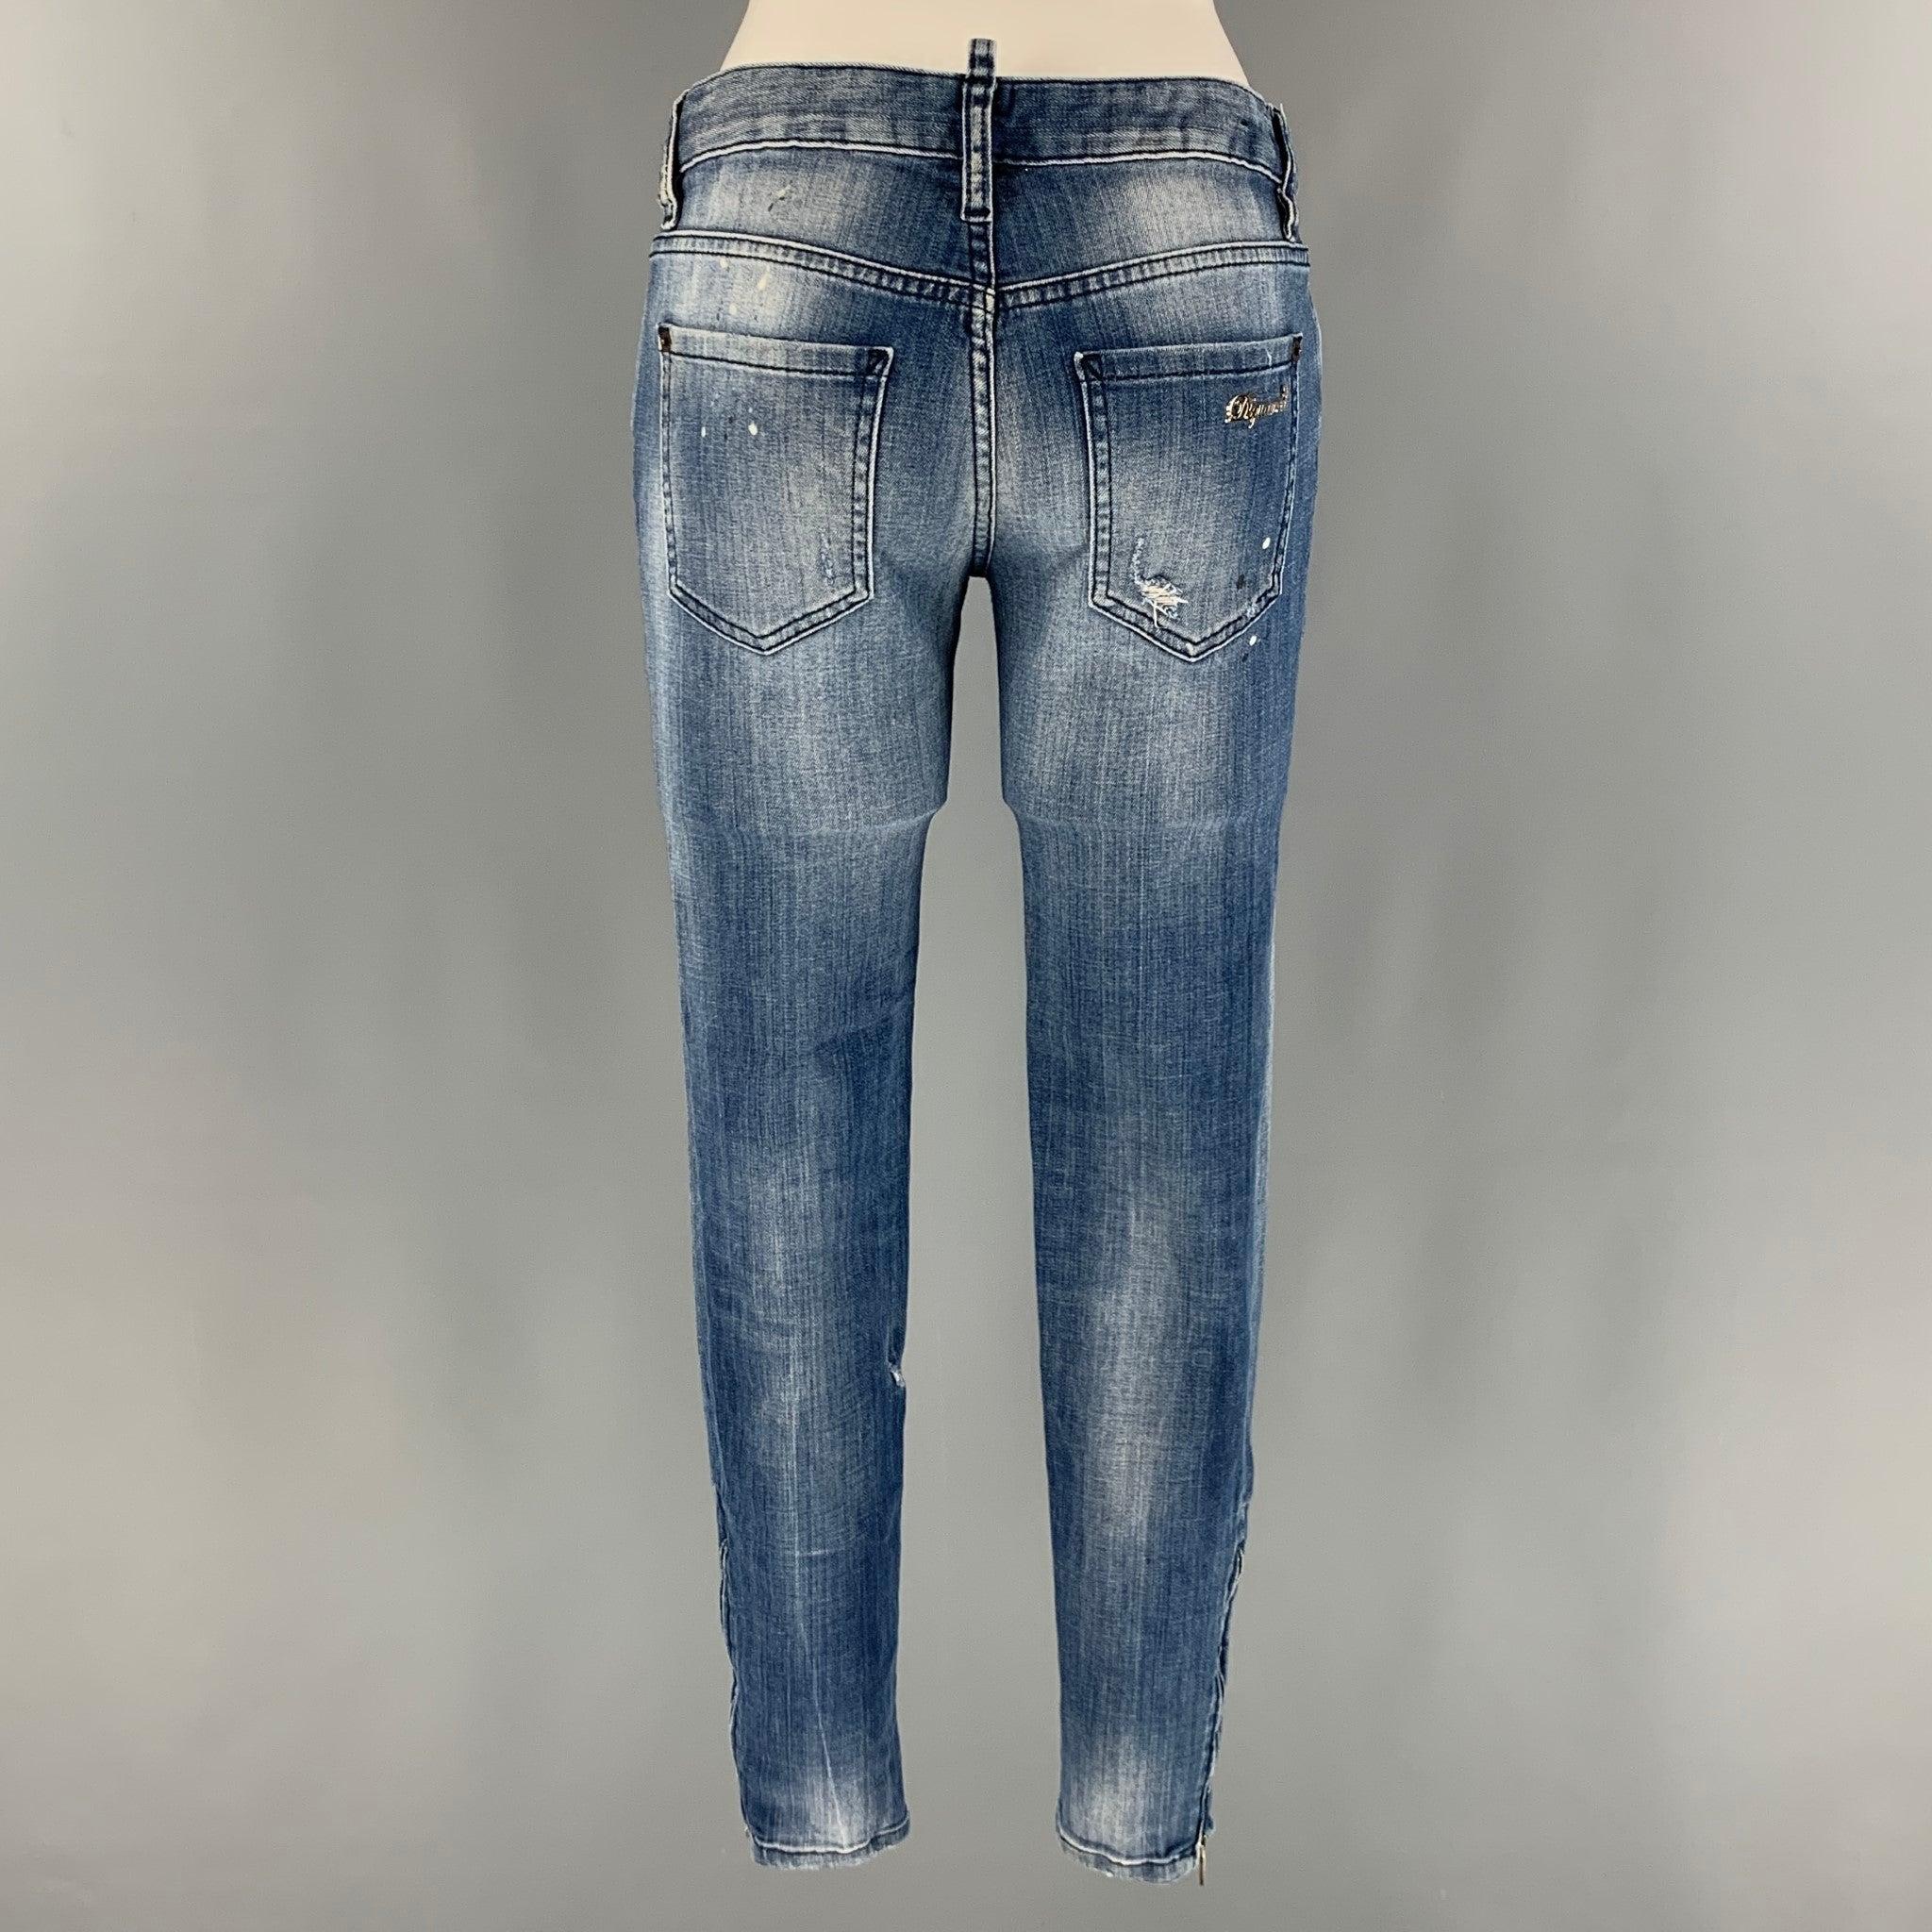 DSQUARED2 skinny jeans comes in a blue cotton and elastane denim featuring a low rise, paint splatter details, and a zipper fly closure. Made in Italy.Very Good Pre- Conditions. 

Marked:   42 

Measurements: 
  Waist: 30 inches Rise: 7 inches